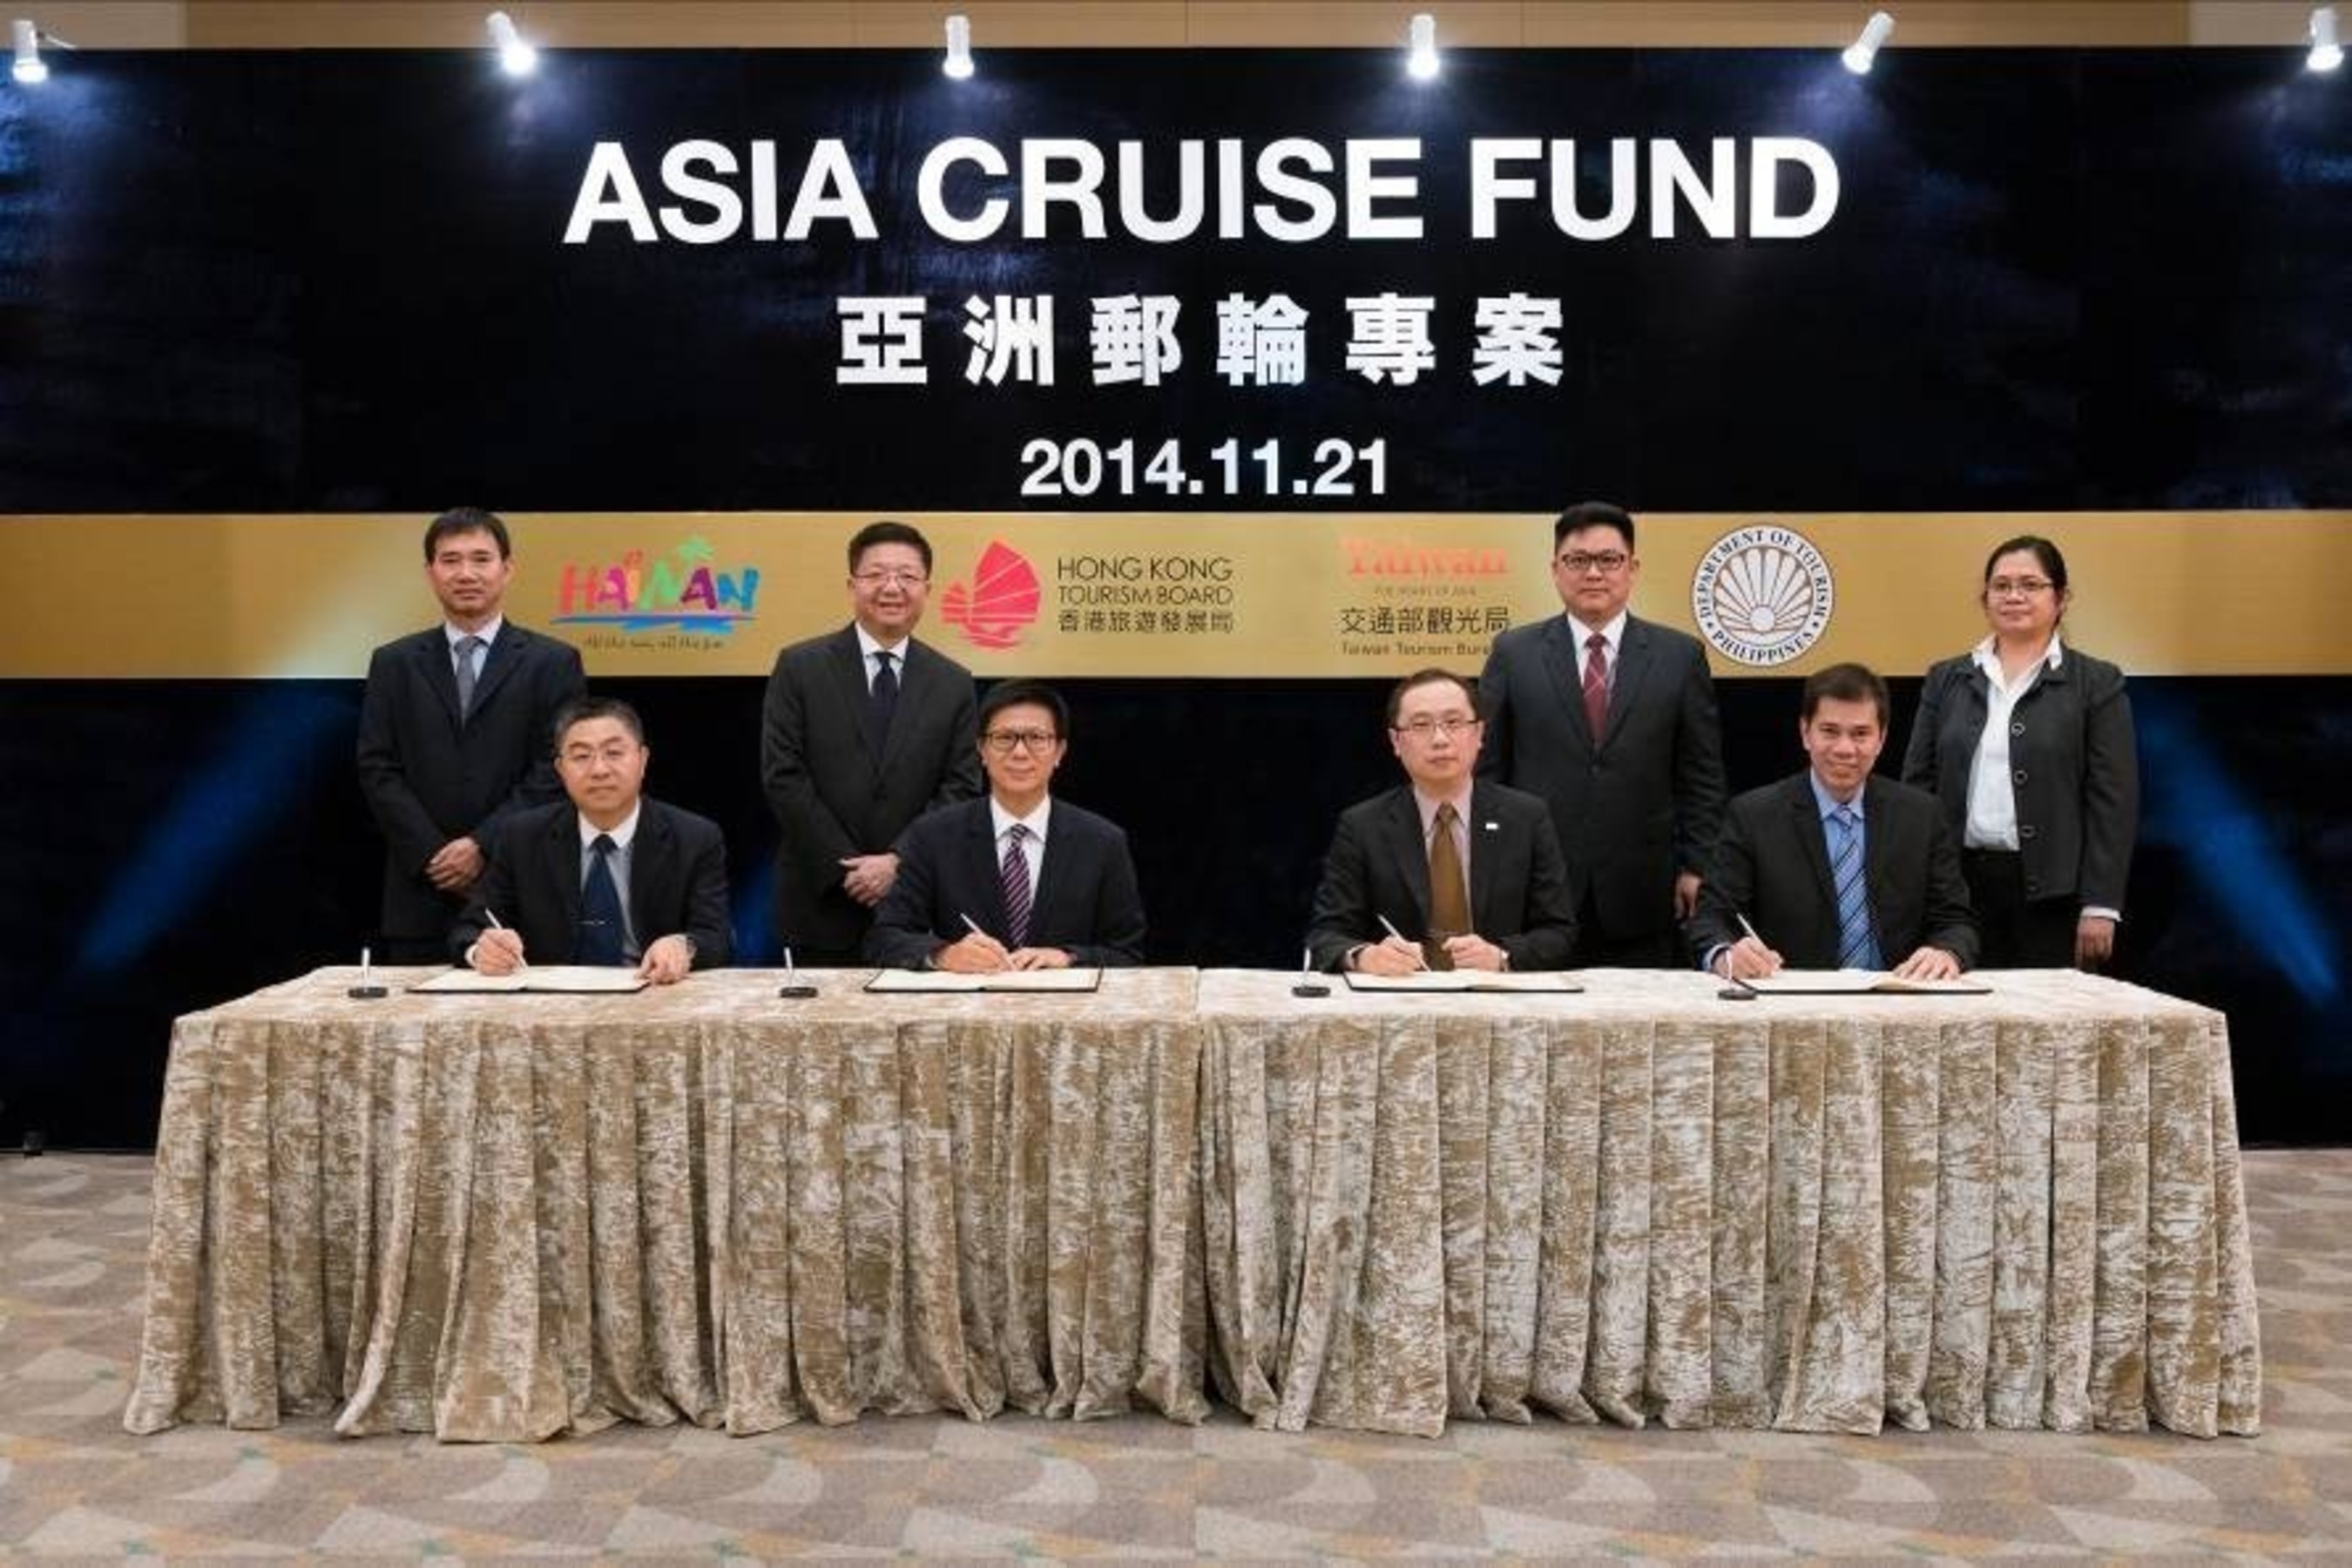 A signing ceremony was held to officially acknowledge the participation of Hainan and the Philippines in the Asia Cruise Fund. From left to right: Hainan Provincial Tourism Development Commission Mr. Zhu Hongwu, Deputy Director-General, Mr. Xie Qiuxiong, Division Director, Domestic Marketing Division; Hong Kong Tourism Board, Mr. Anthony Lau, Executive Director, Mr. Kenneth Wong, General Manager, MICE & Cruise; Taiwan Tourism Bureau, Mr. Joseph Cheng, Section Chief, International Affairs Division, Dr. Wayne Liu, Deputy Director-General; The Philippines, Mr. Benito C. Bengzon, Jr., Assistant Secretary, Tourism Development, Philippine Department of Tourism, Ms. Catherine Gonzales, Undersecretary for Administration and Procurement, Philippine Department of Transportation and Communication